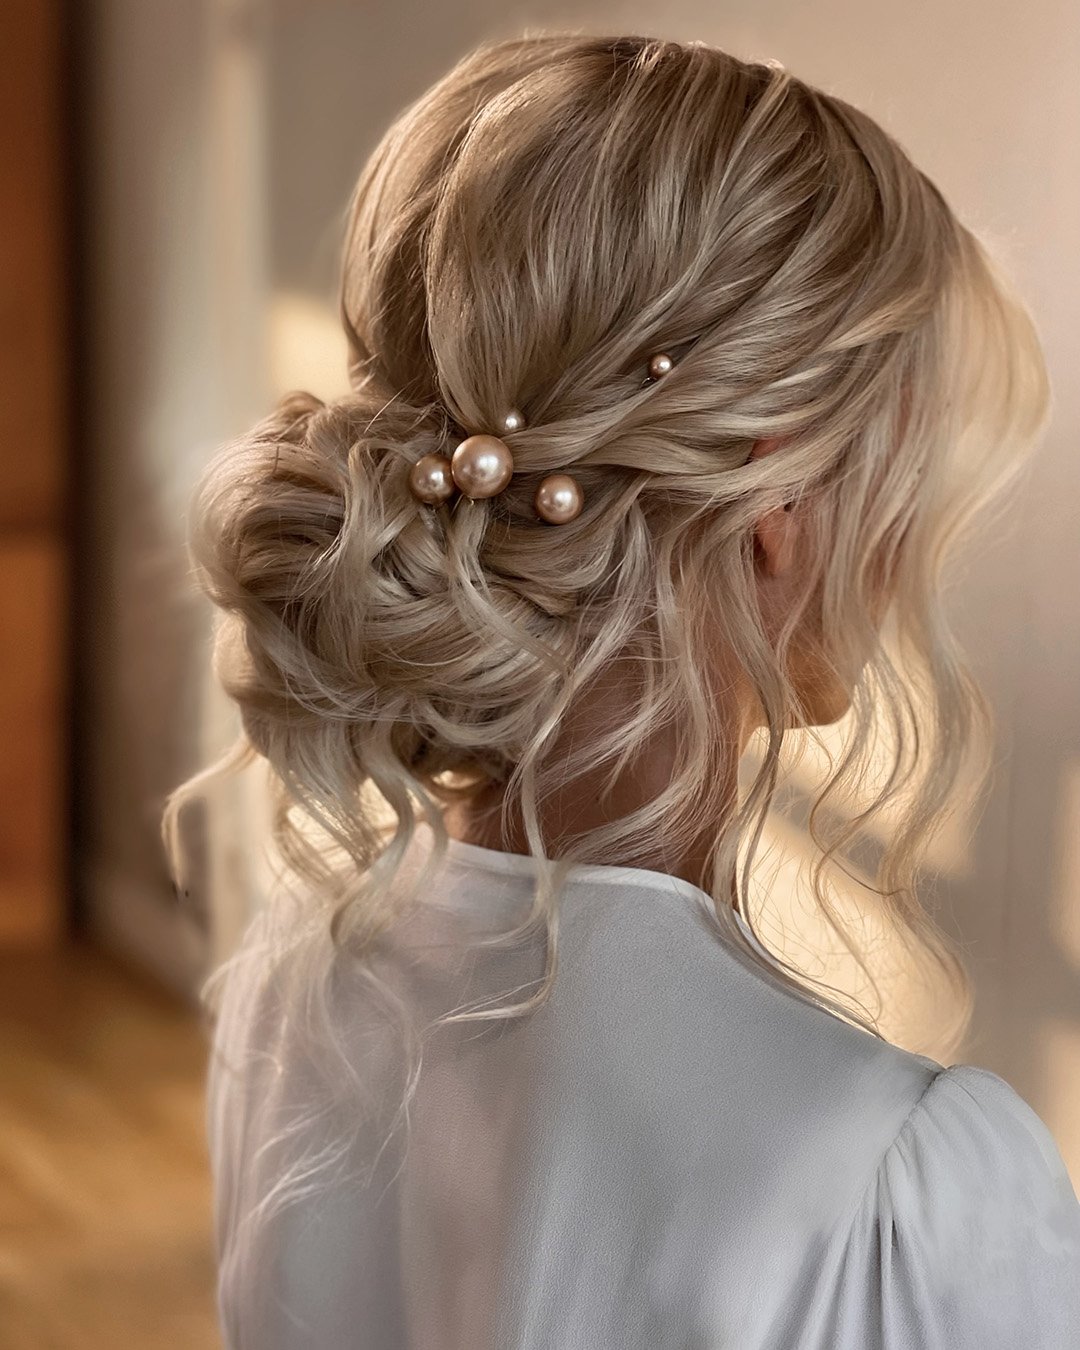 wedding hairstyles for thin hair messy with pearls kasia_fortuna